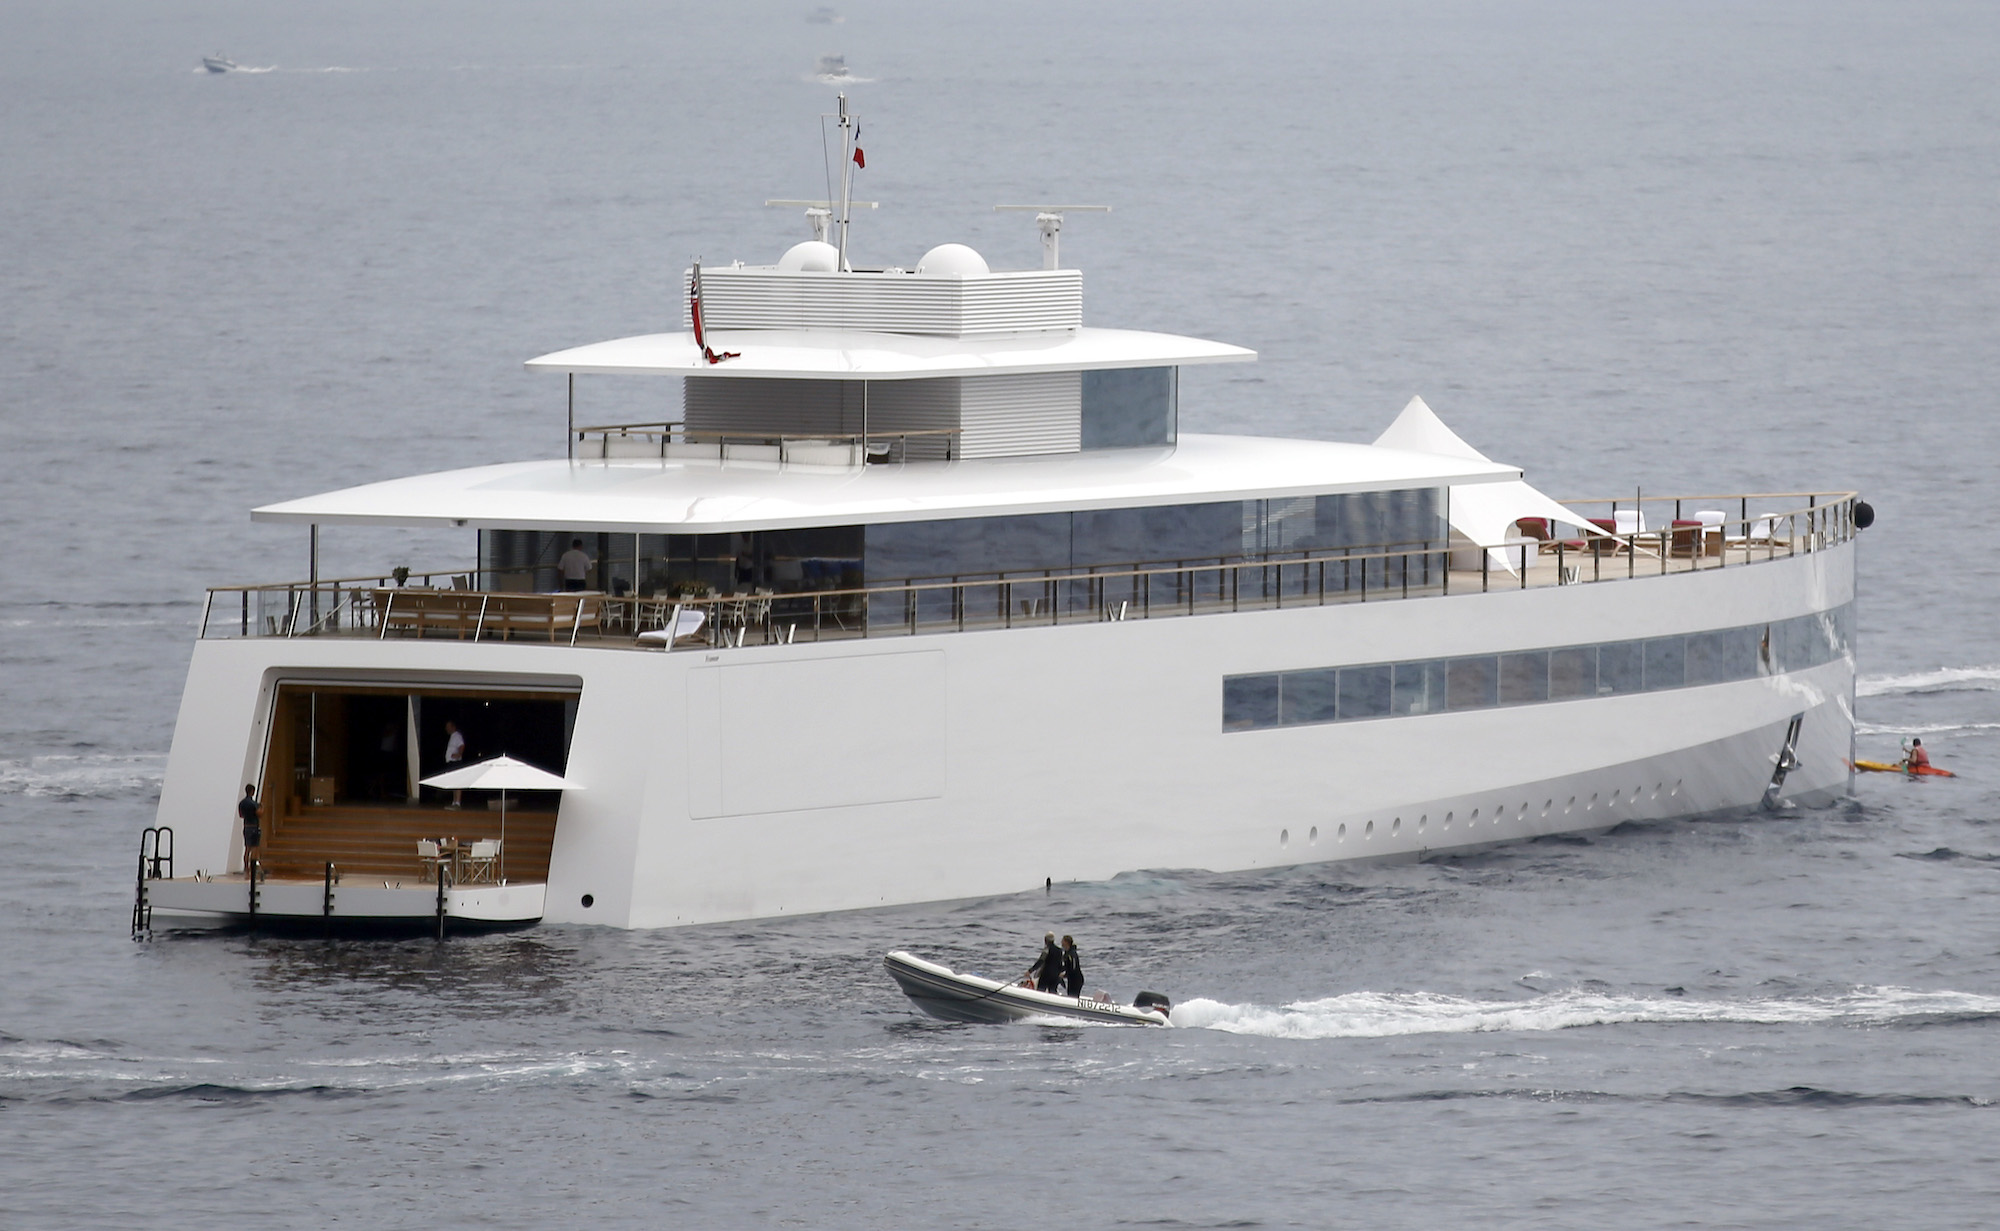 The yacht Venus, designed for Steve Jobs by French designer Philippe Starck, is moored on the French Riviera in July 2013